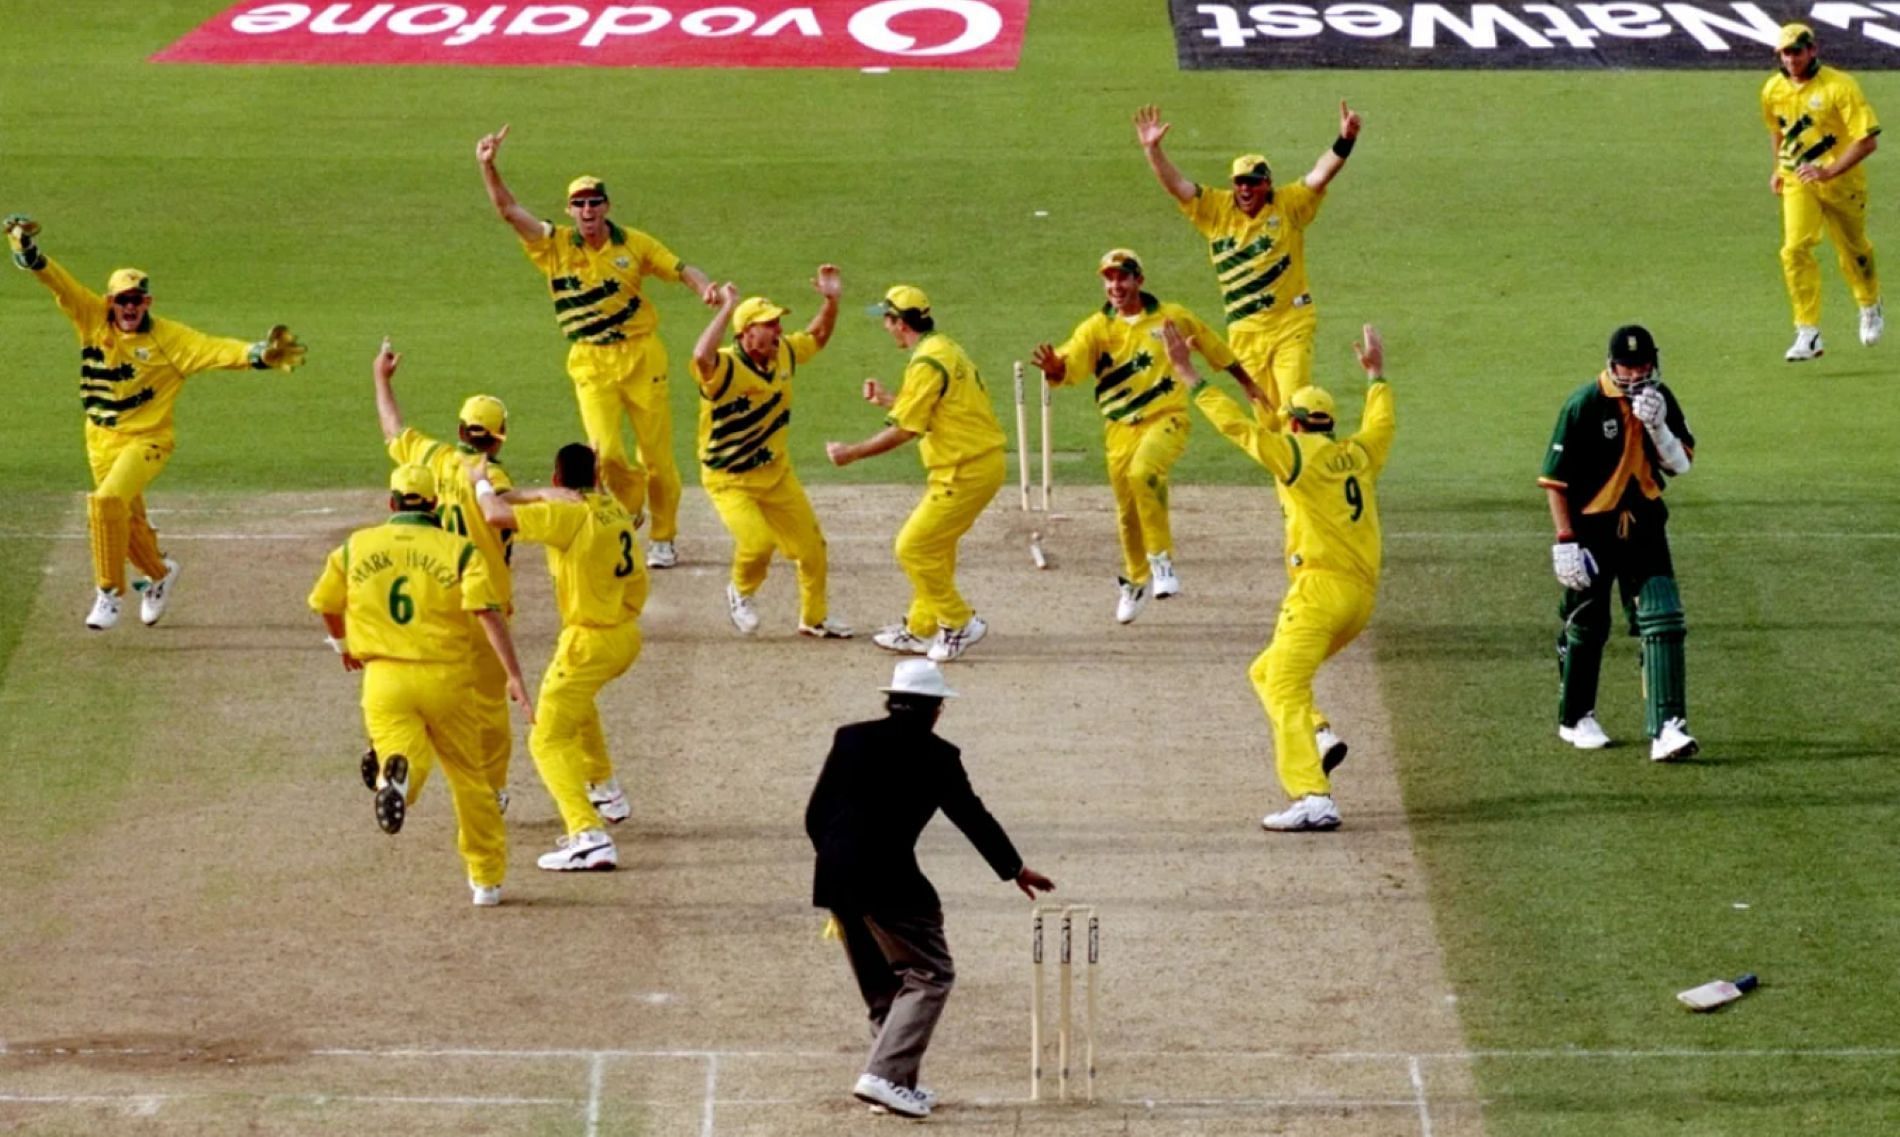 Scenes from the 1999 World Cup semi-final that haunts South African fans to date.